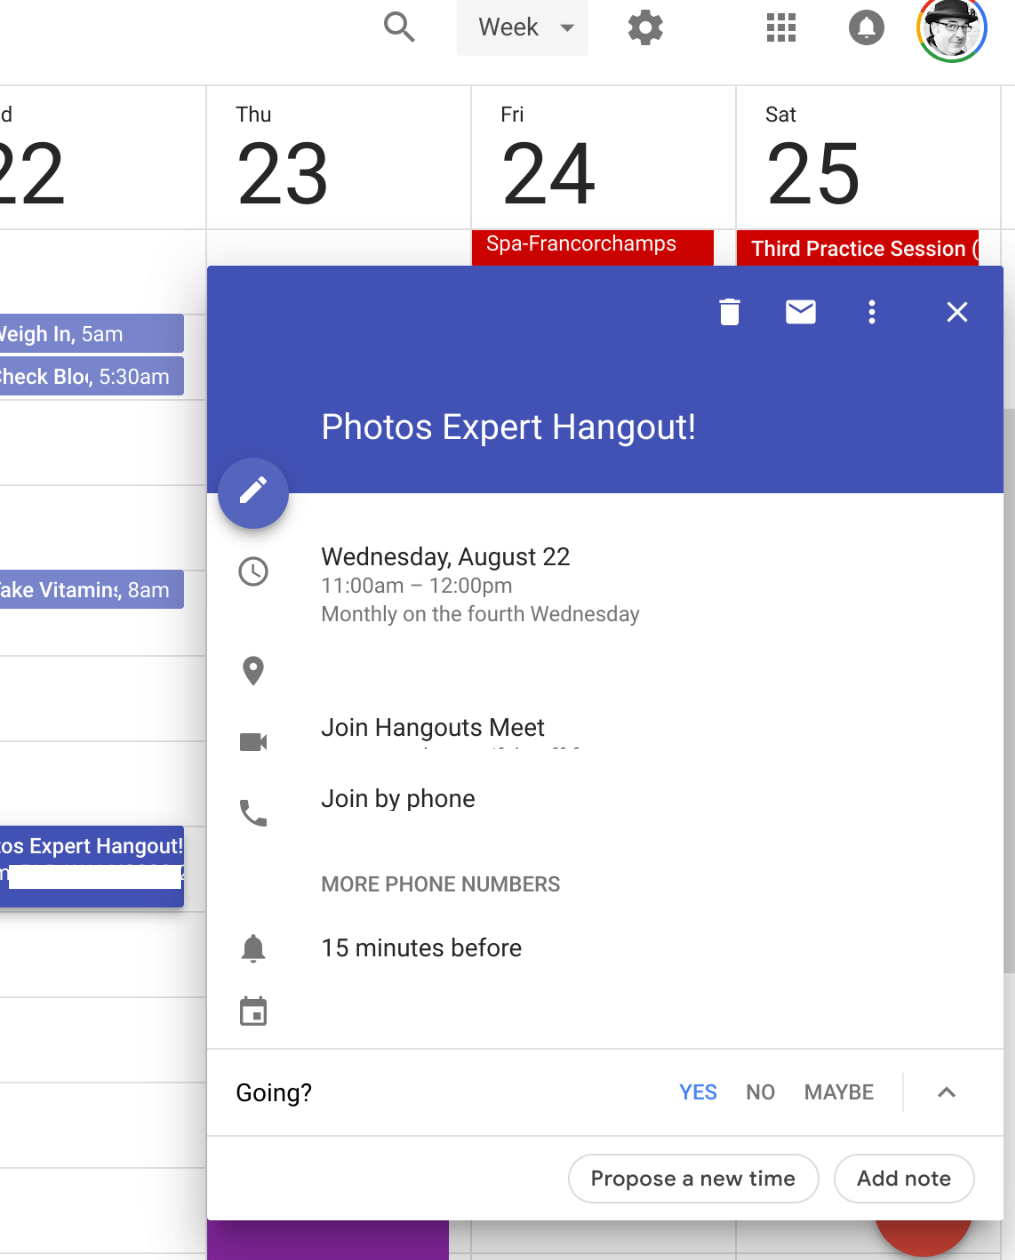 Google Calendar Now Allows You To Propose New Meeting Times